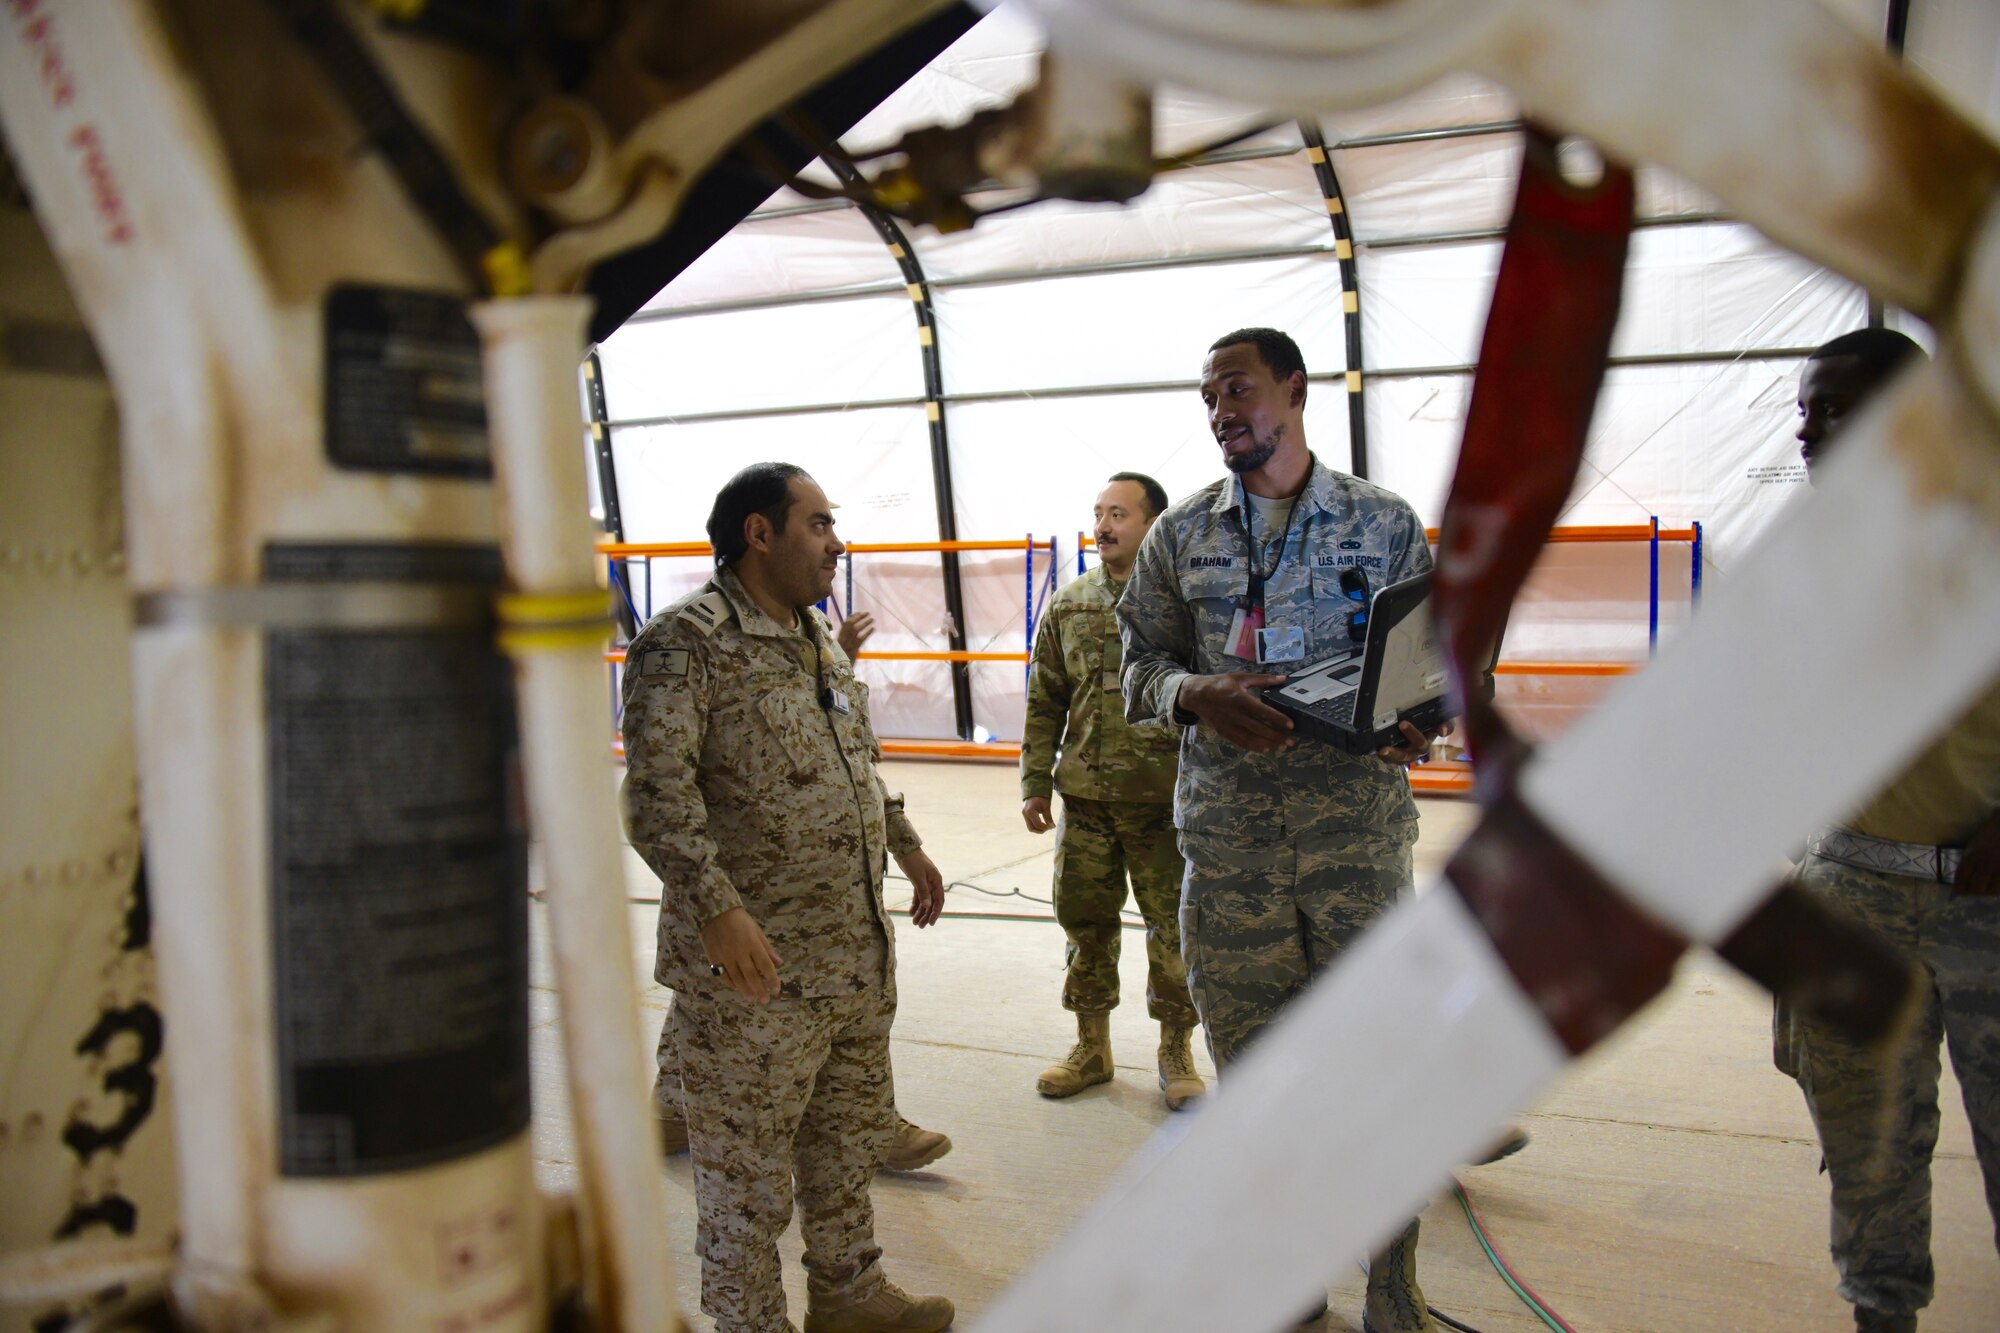 U.S. Air Force Tech. Sgt. Chris Graham (right), 378th Expeditionary Maintenance Squadron nondestructive inspection noncommissioned officer in charge, talks to Royal Saudi Air Force Chief Salman D. Al-Malki , PSAB head of aircraft maintenance inspections, about the processes of inspecting an F-15E Strike Eagle at Prince Sultan Air Base, Kingdom of Saudi Arabia, Feb. 4, 2020.